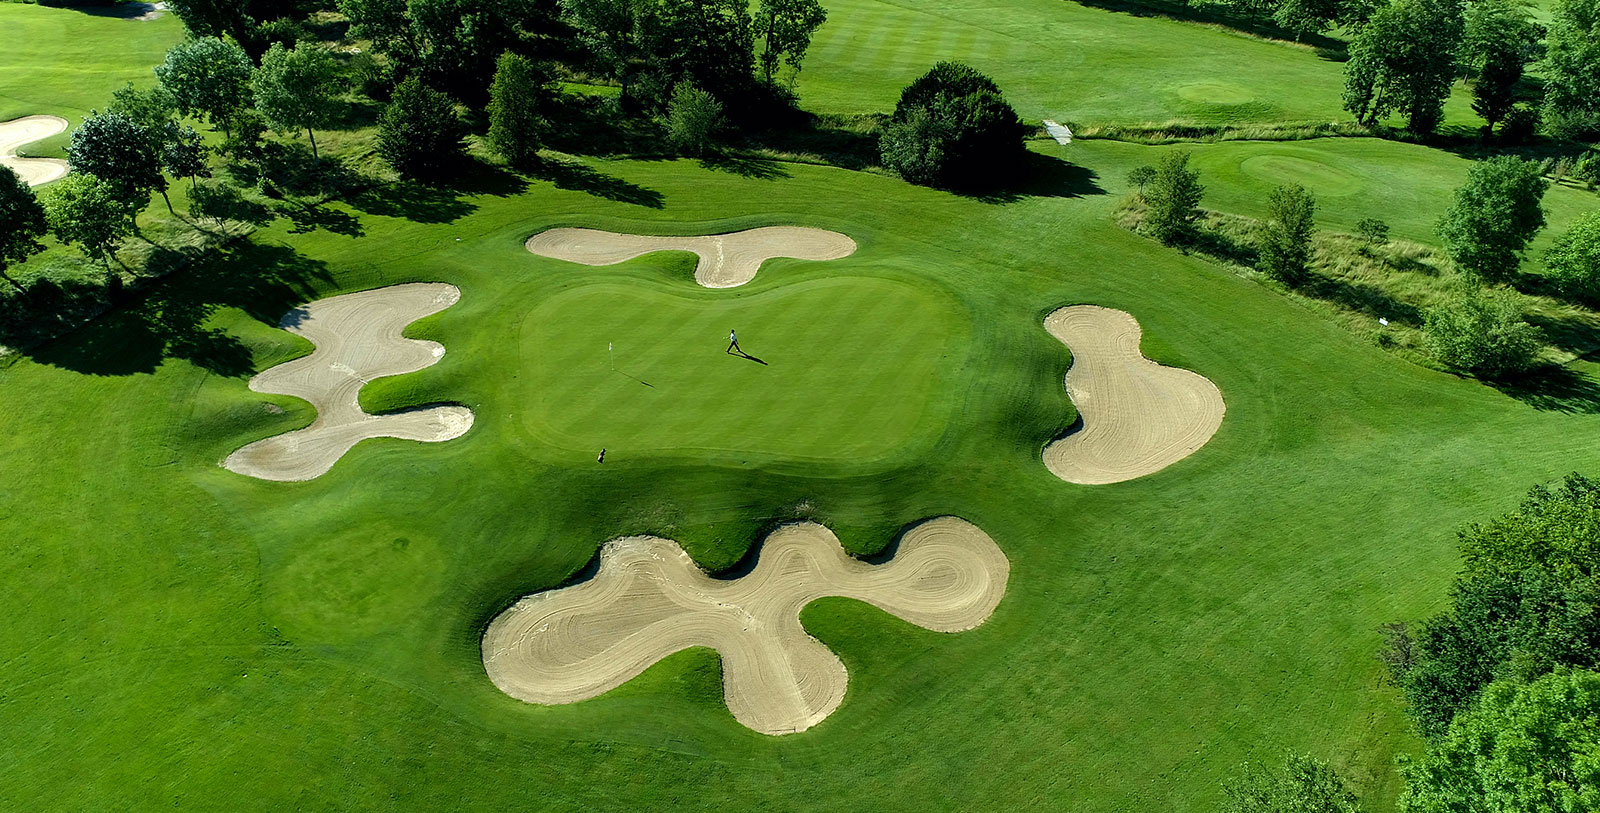 Experience a round of golf at one of the top 10 golf courses in the Northeast region of France.